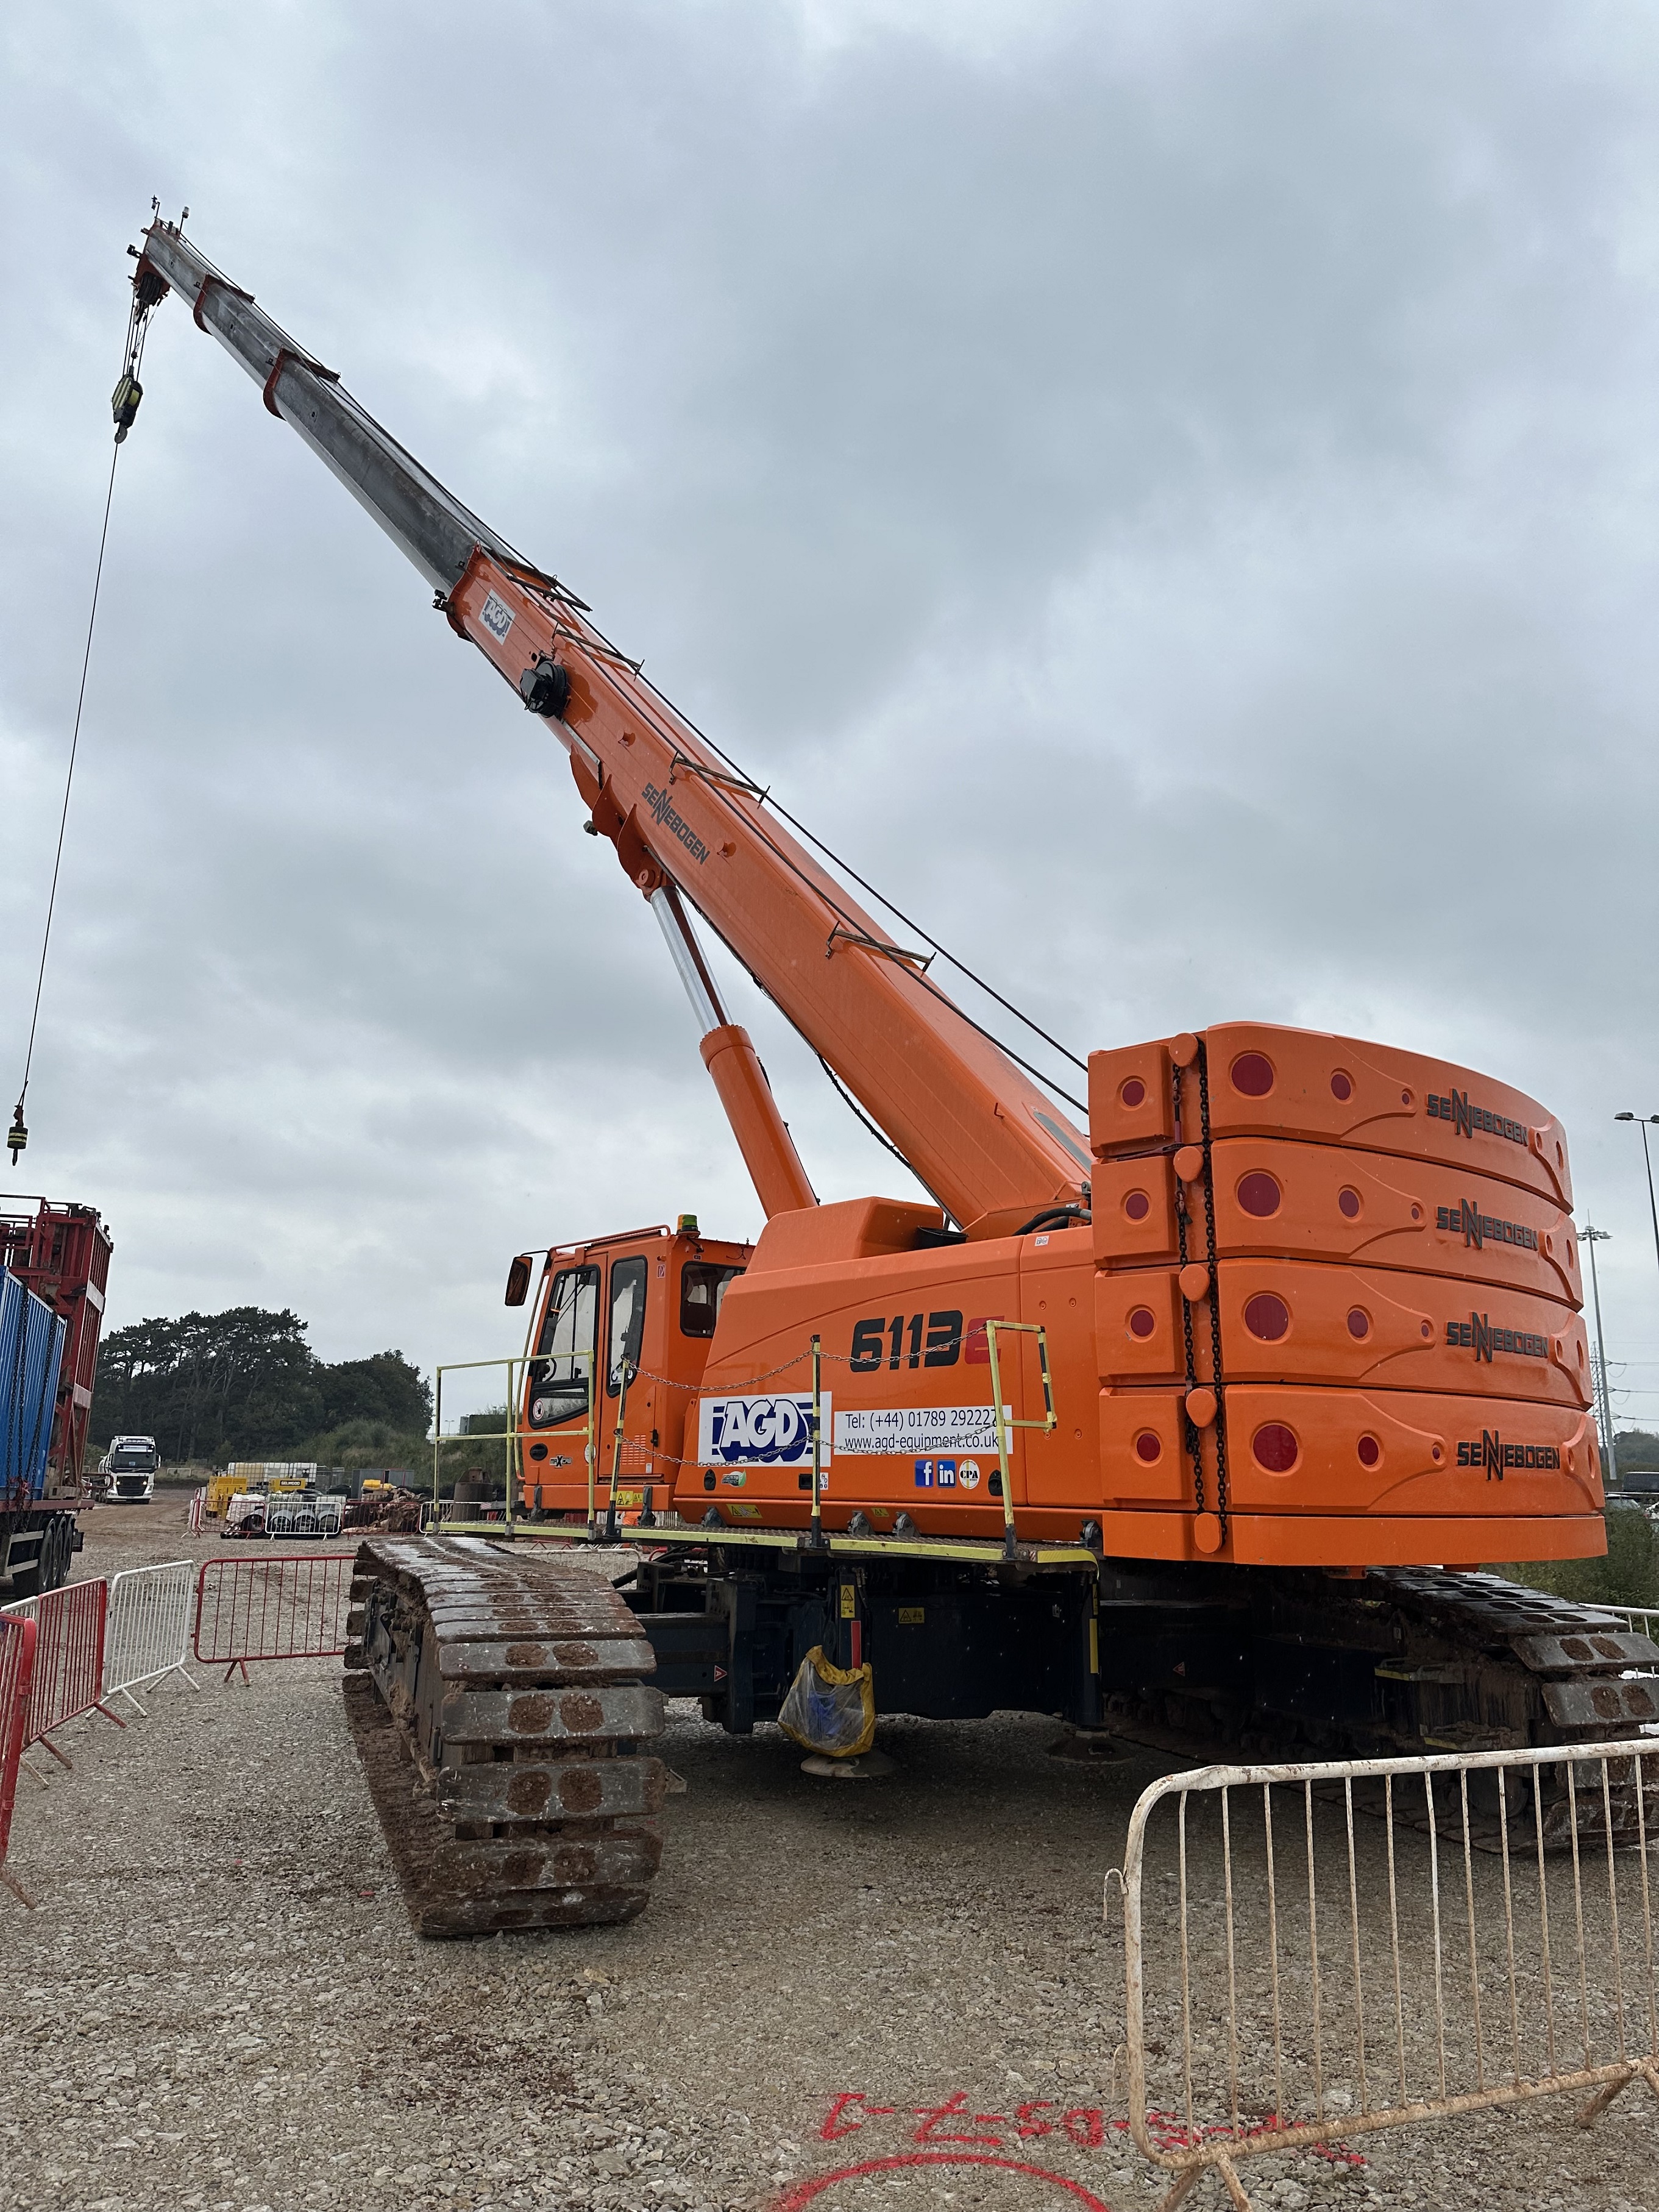 Suppliers of Advanced Hydraulic Crawler Crane Hire Solutions